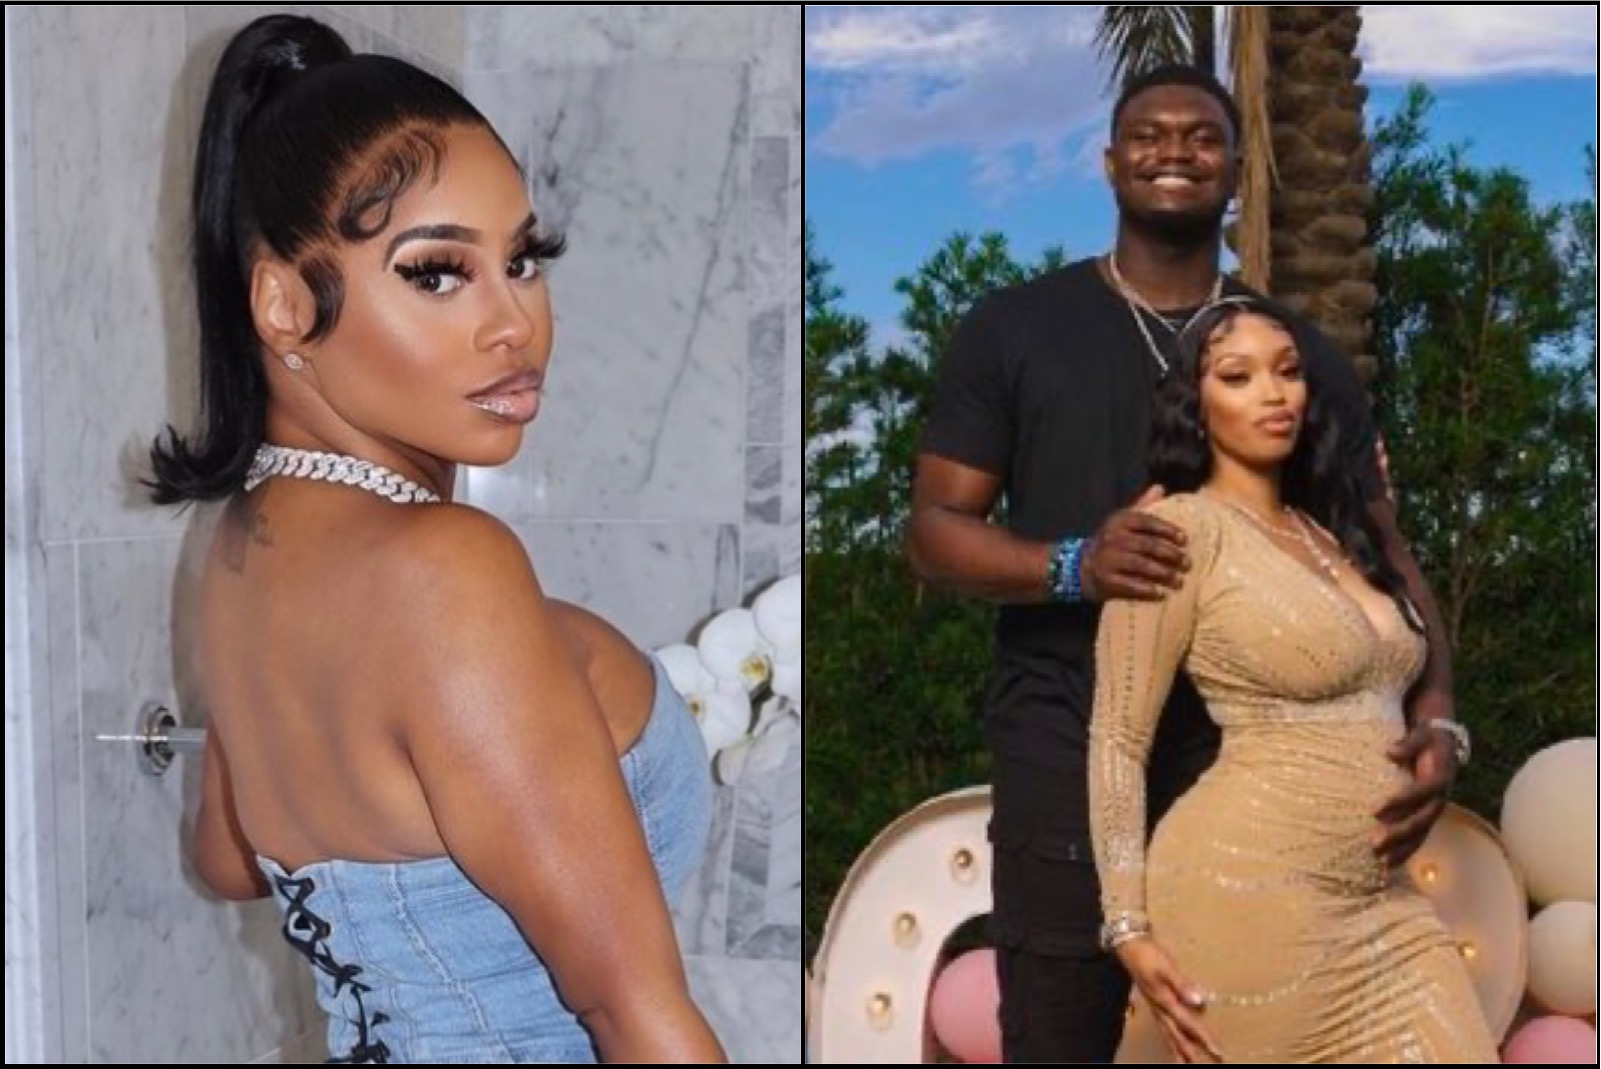 3rd Woman Yami Taylor Exposes Zion Williamson For Cheating on Her With Adult Film Star That He Got Pregnant